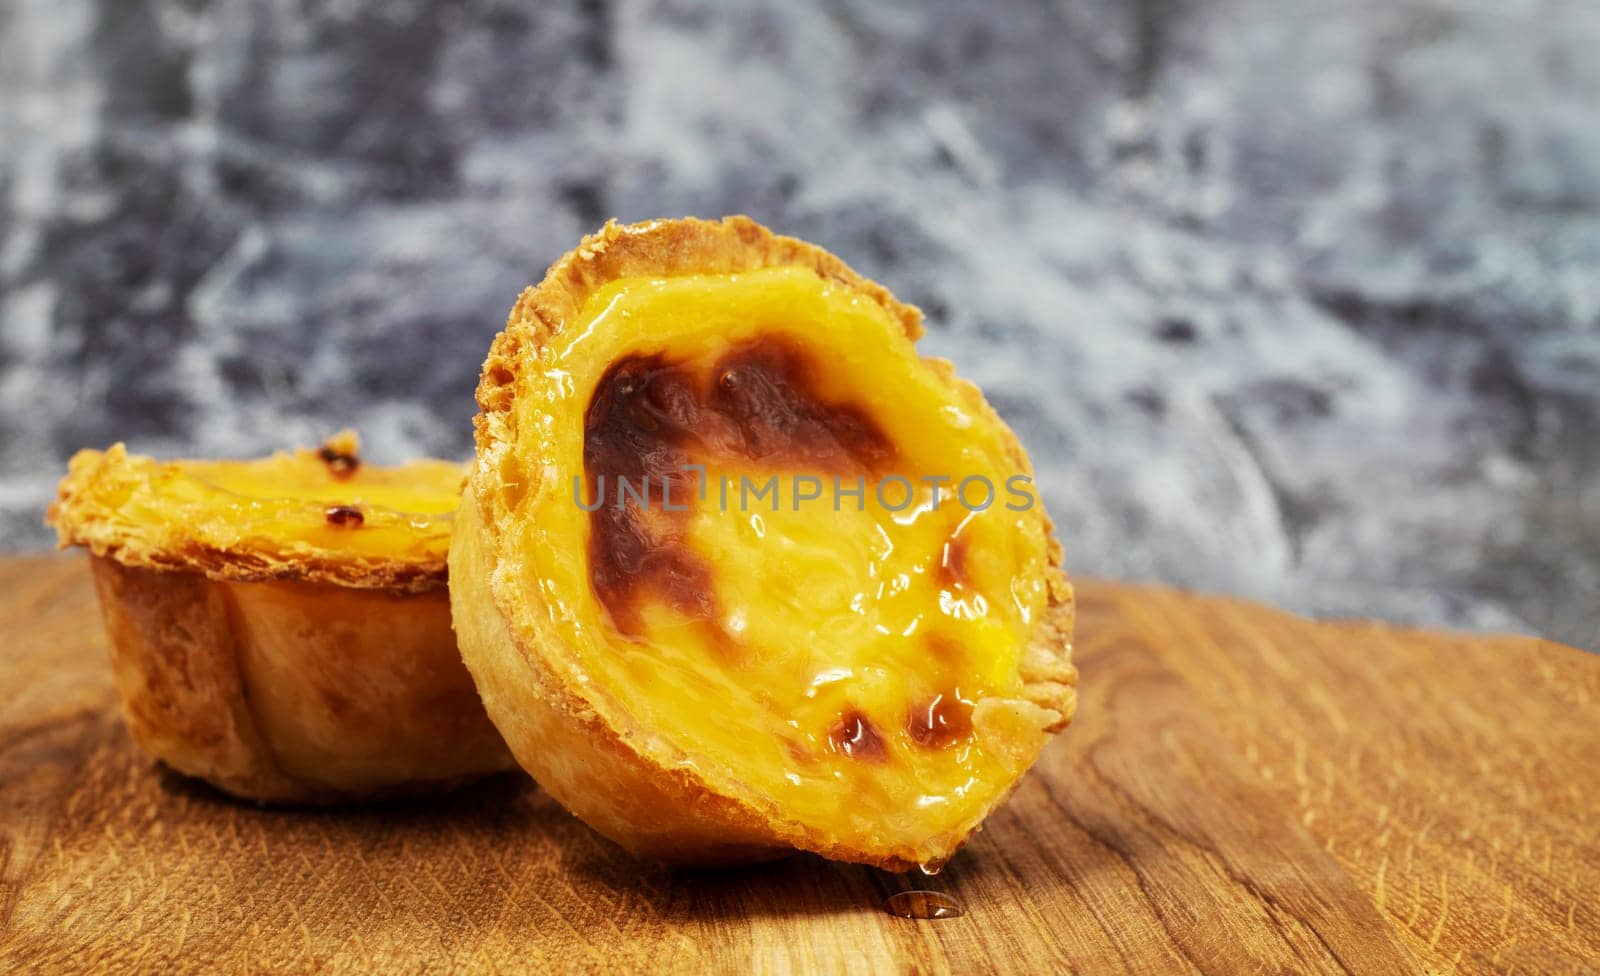 Pastel de nata tarts or Portuguese egg tart on a wooden brown background. Pastel de Belem is a small pie with a crispy puff pastry crust and a custard cream filling. Sweet dessert